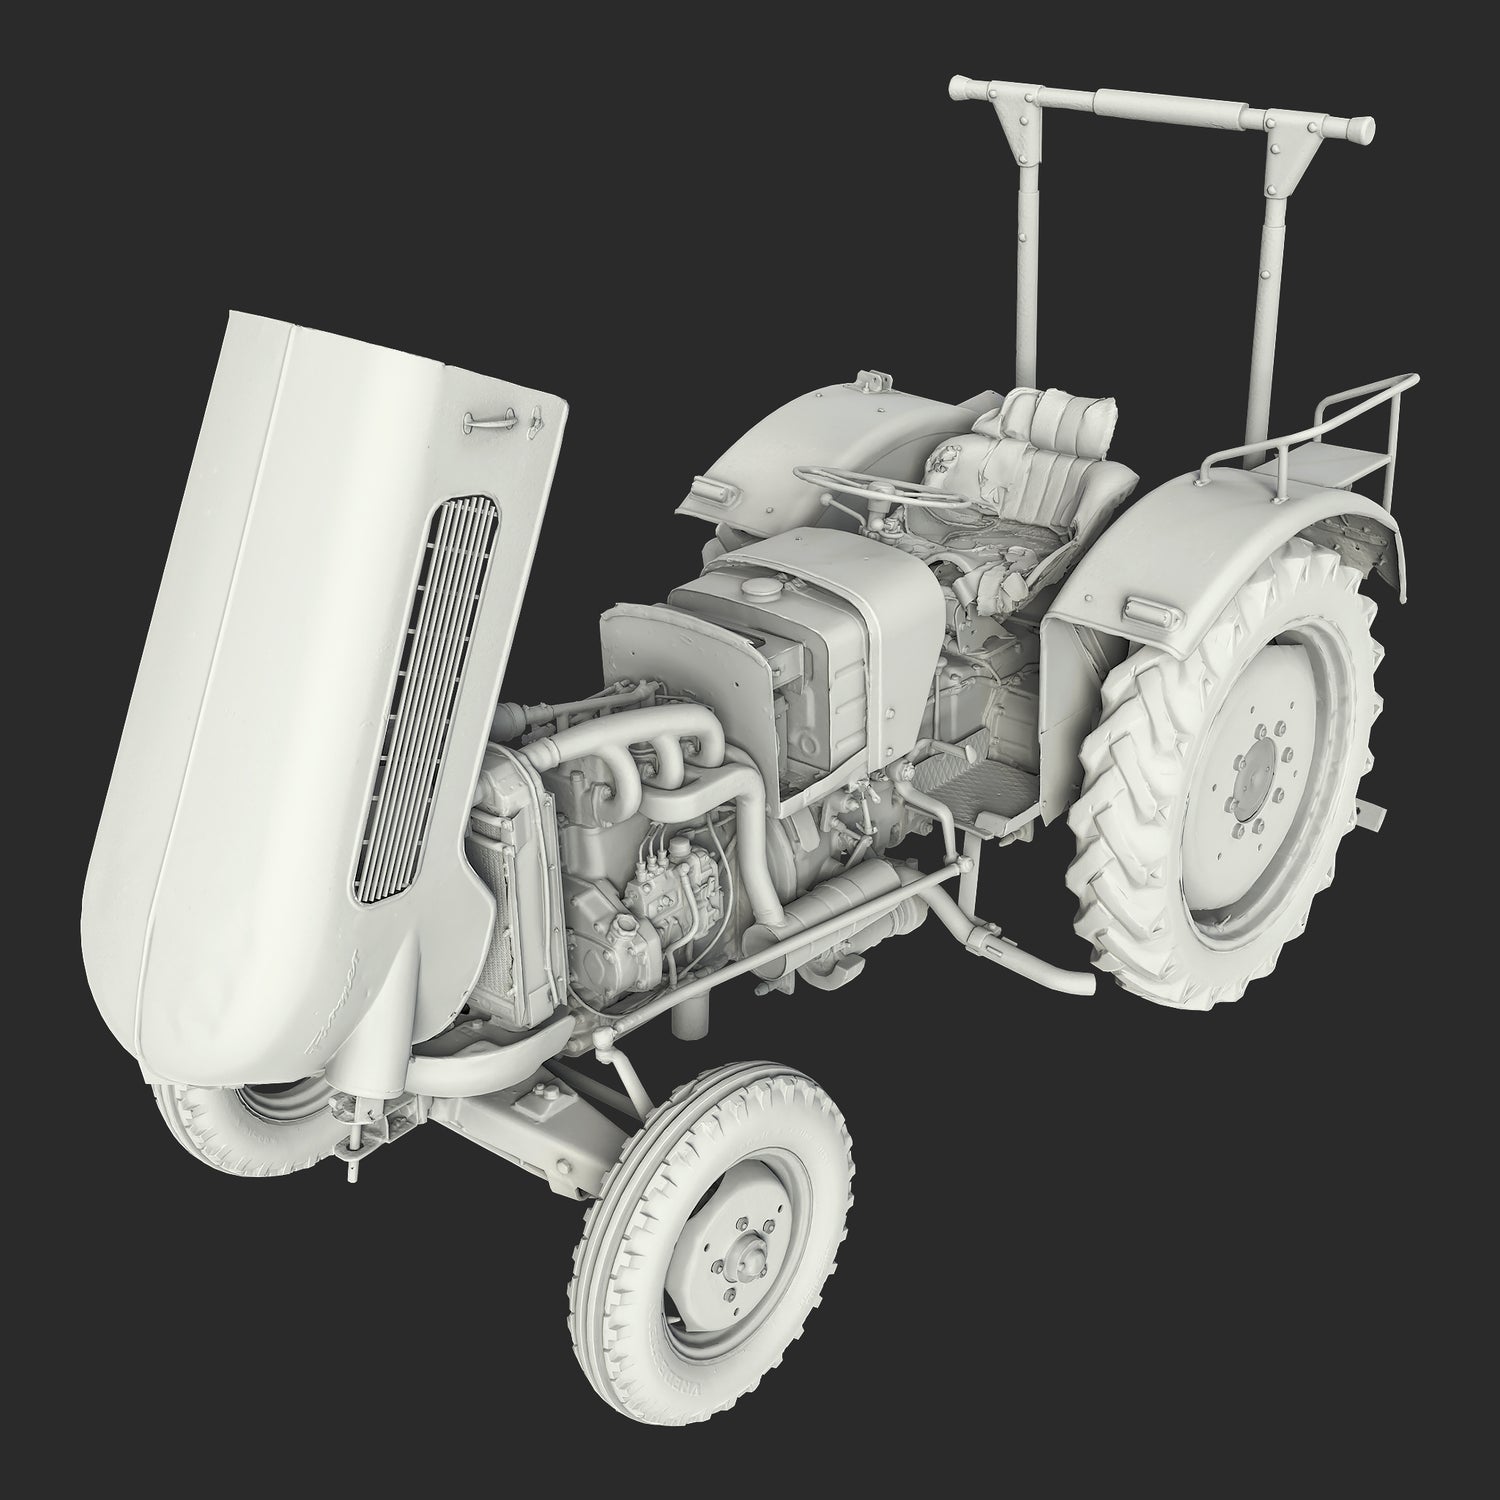 Ambient Occlusion map rendering of a 3D model of open used rusty Vintage Tractor - side view